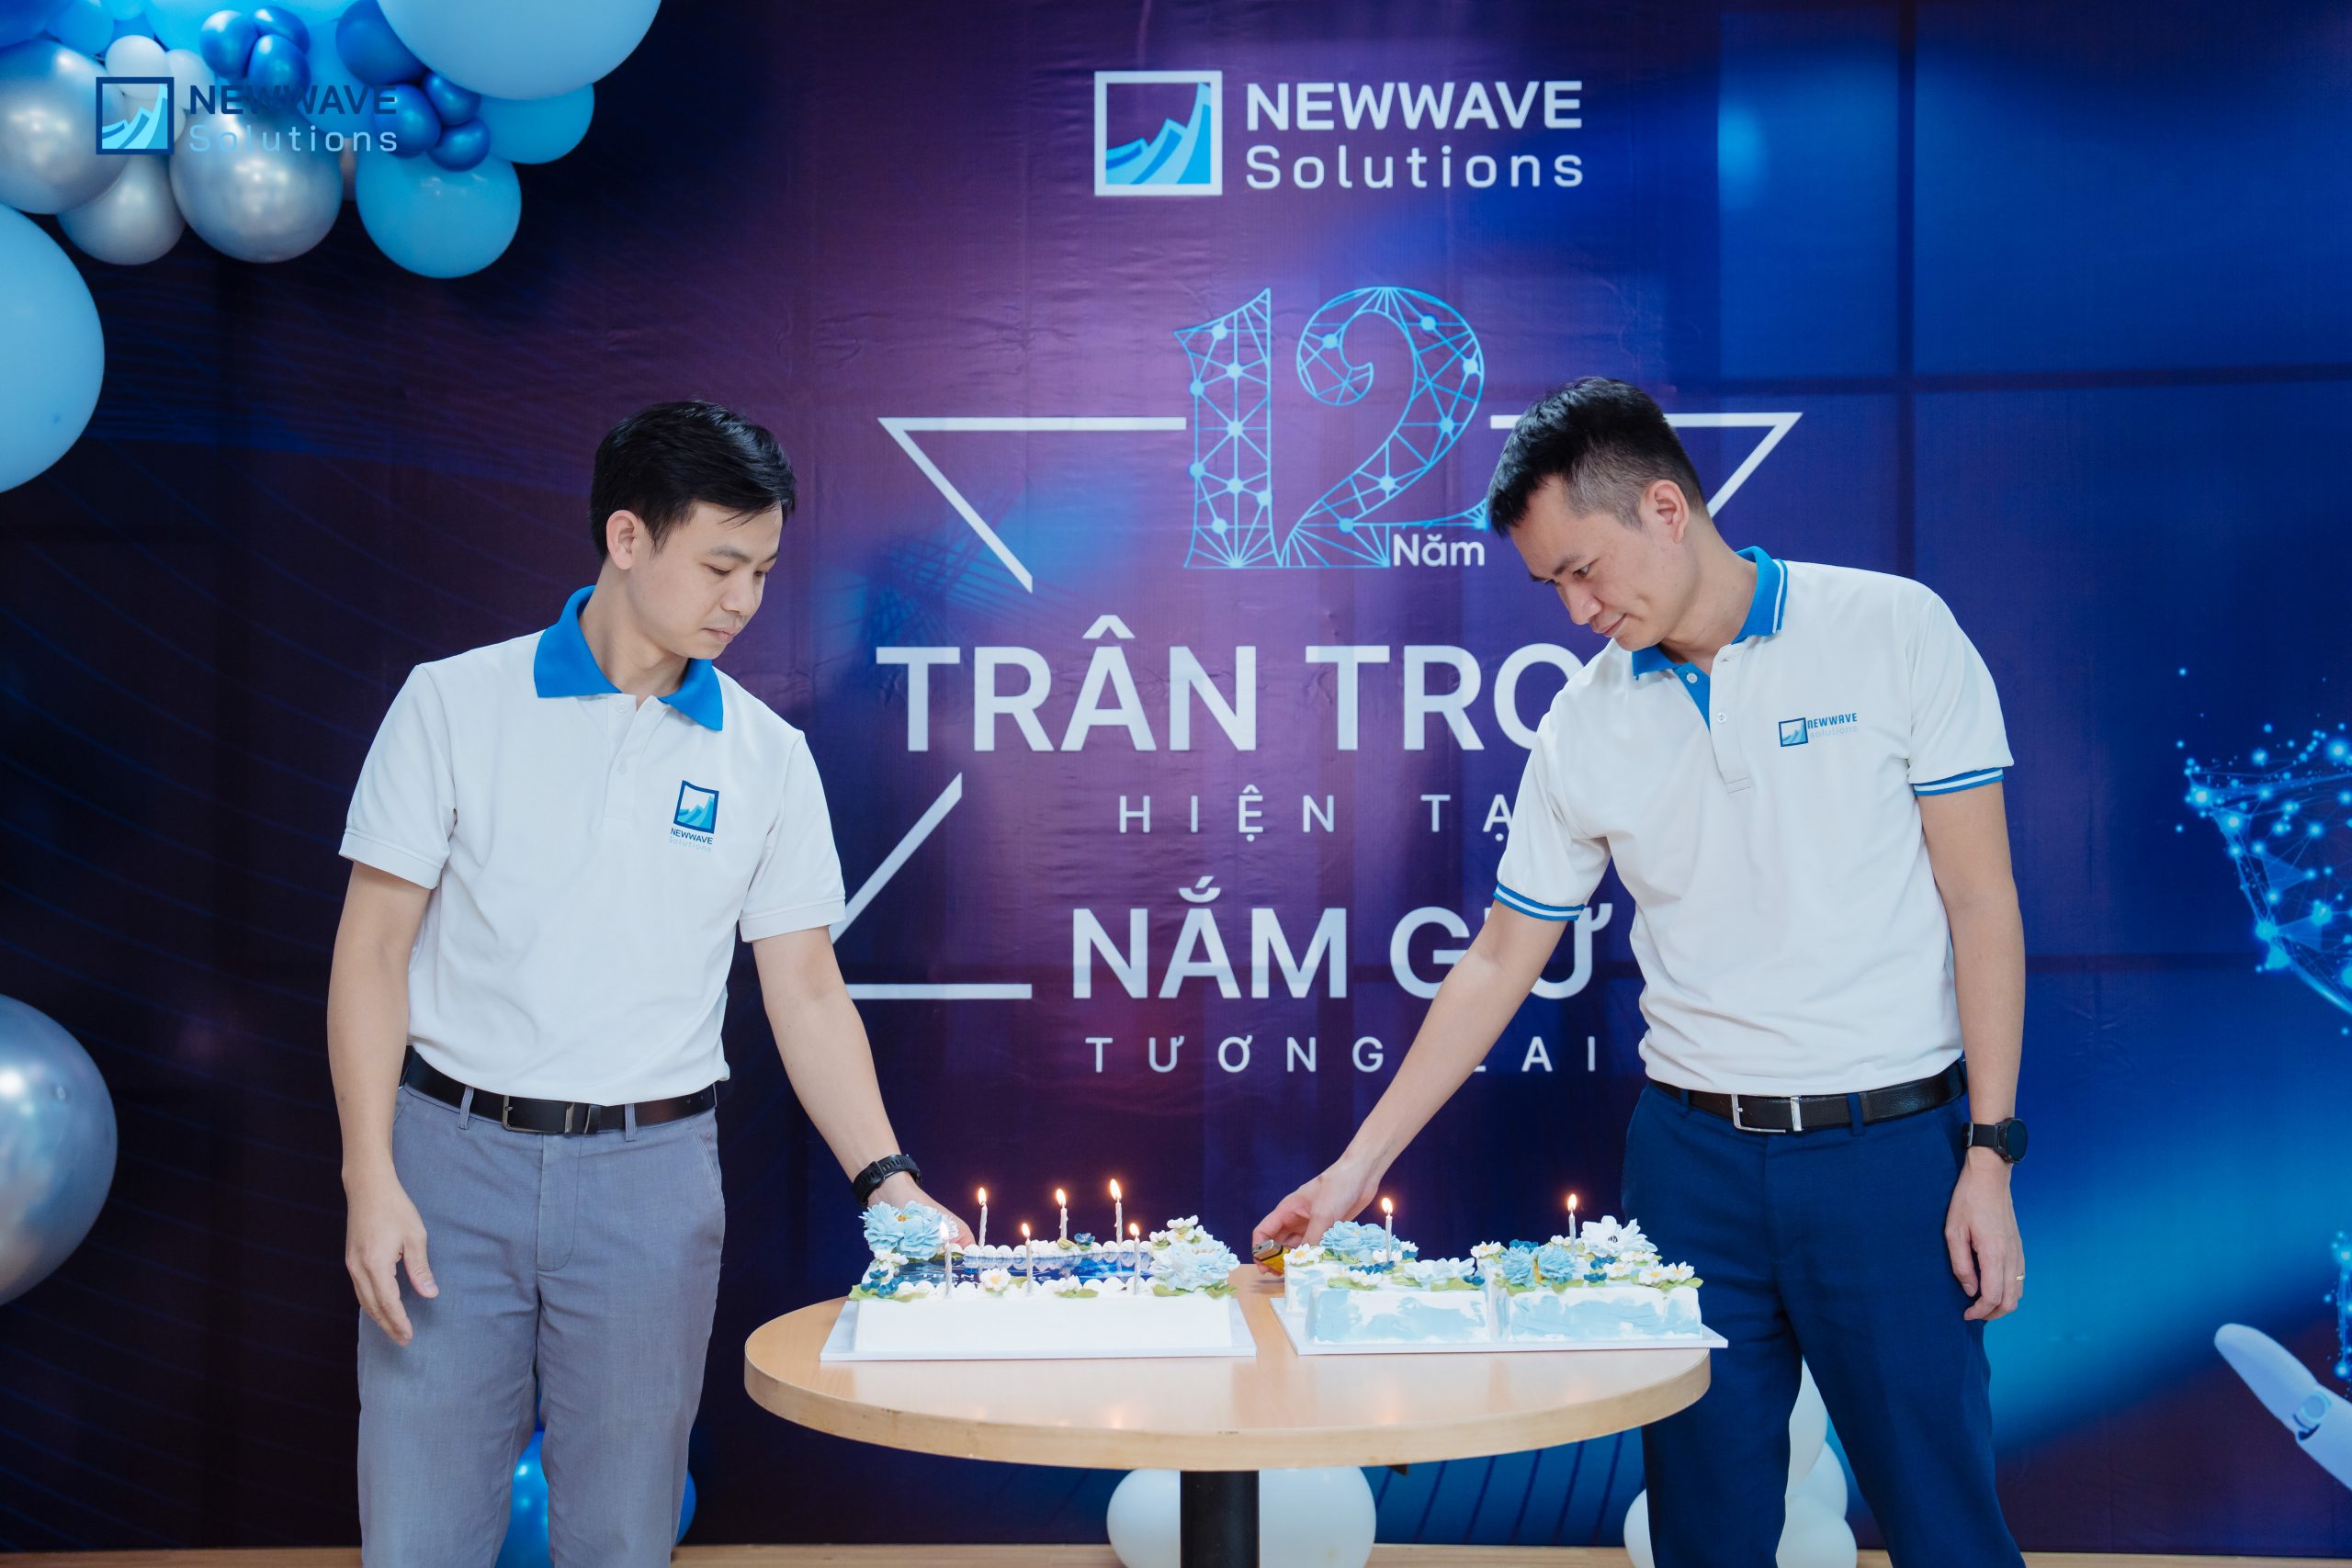 Newwave Solutions - 12th Anniversary